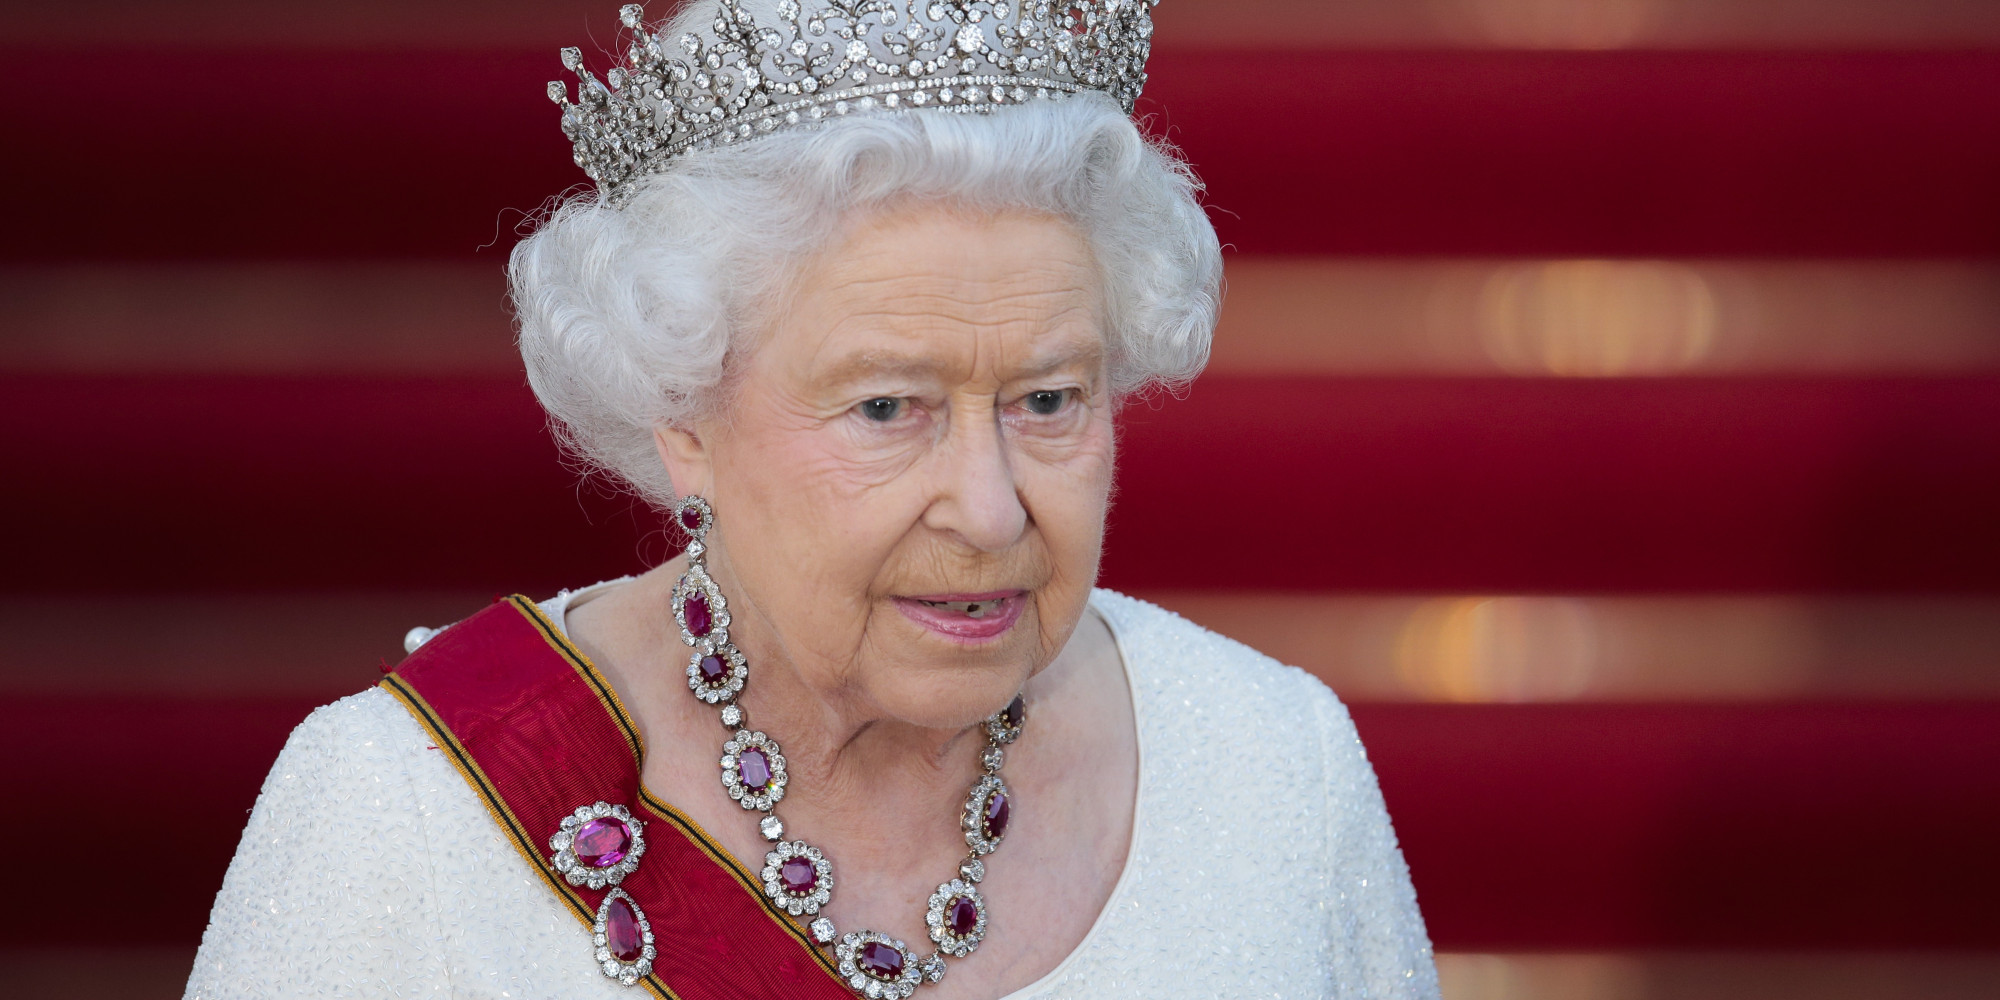 Queen Calls For European Unity At German Banquet Attended By David